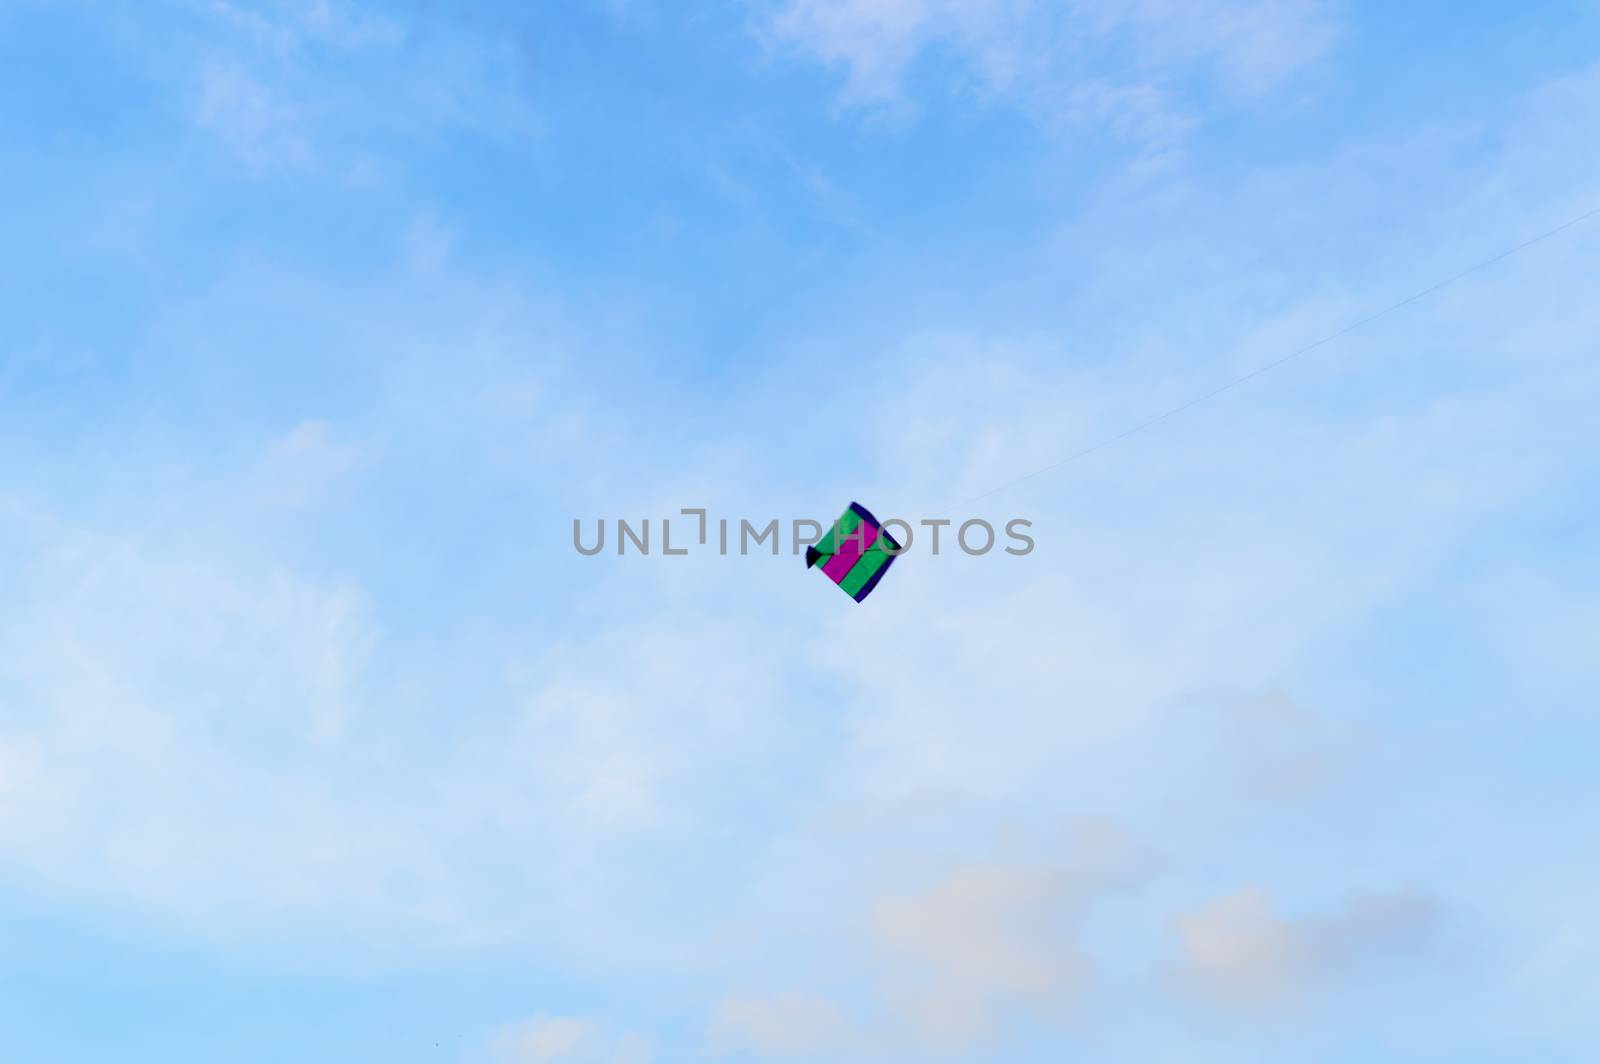 Kite flying in the sky. Kites flying picture with blue sky and white clouds. Photography in the eve of Vishwakarma Puja in Kolkata. Low angel View. Motion Blur. by sudiptabhowmick